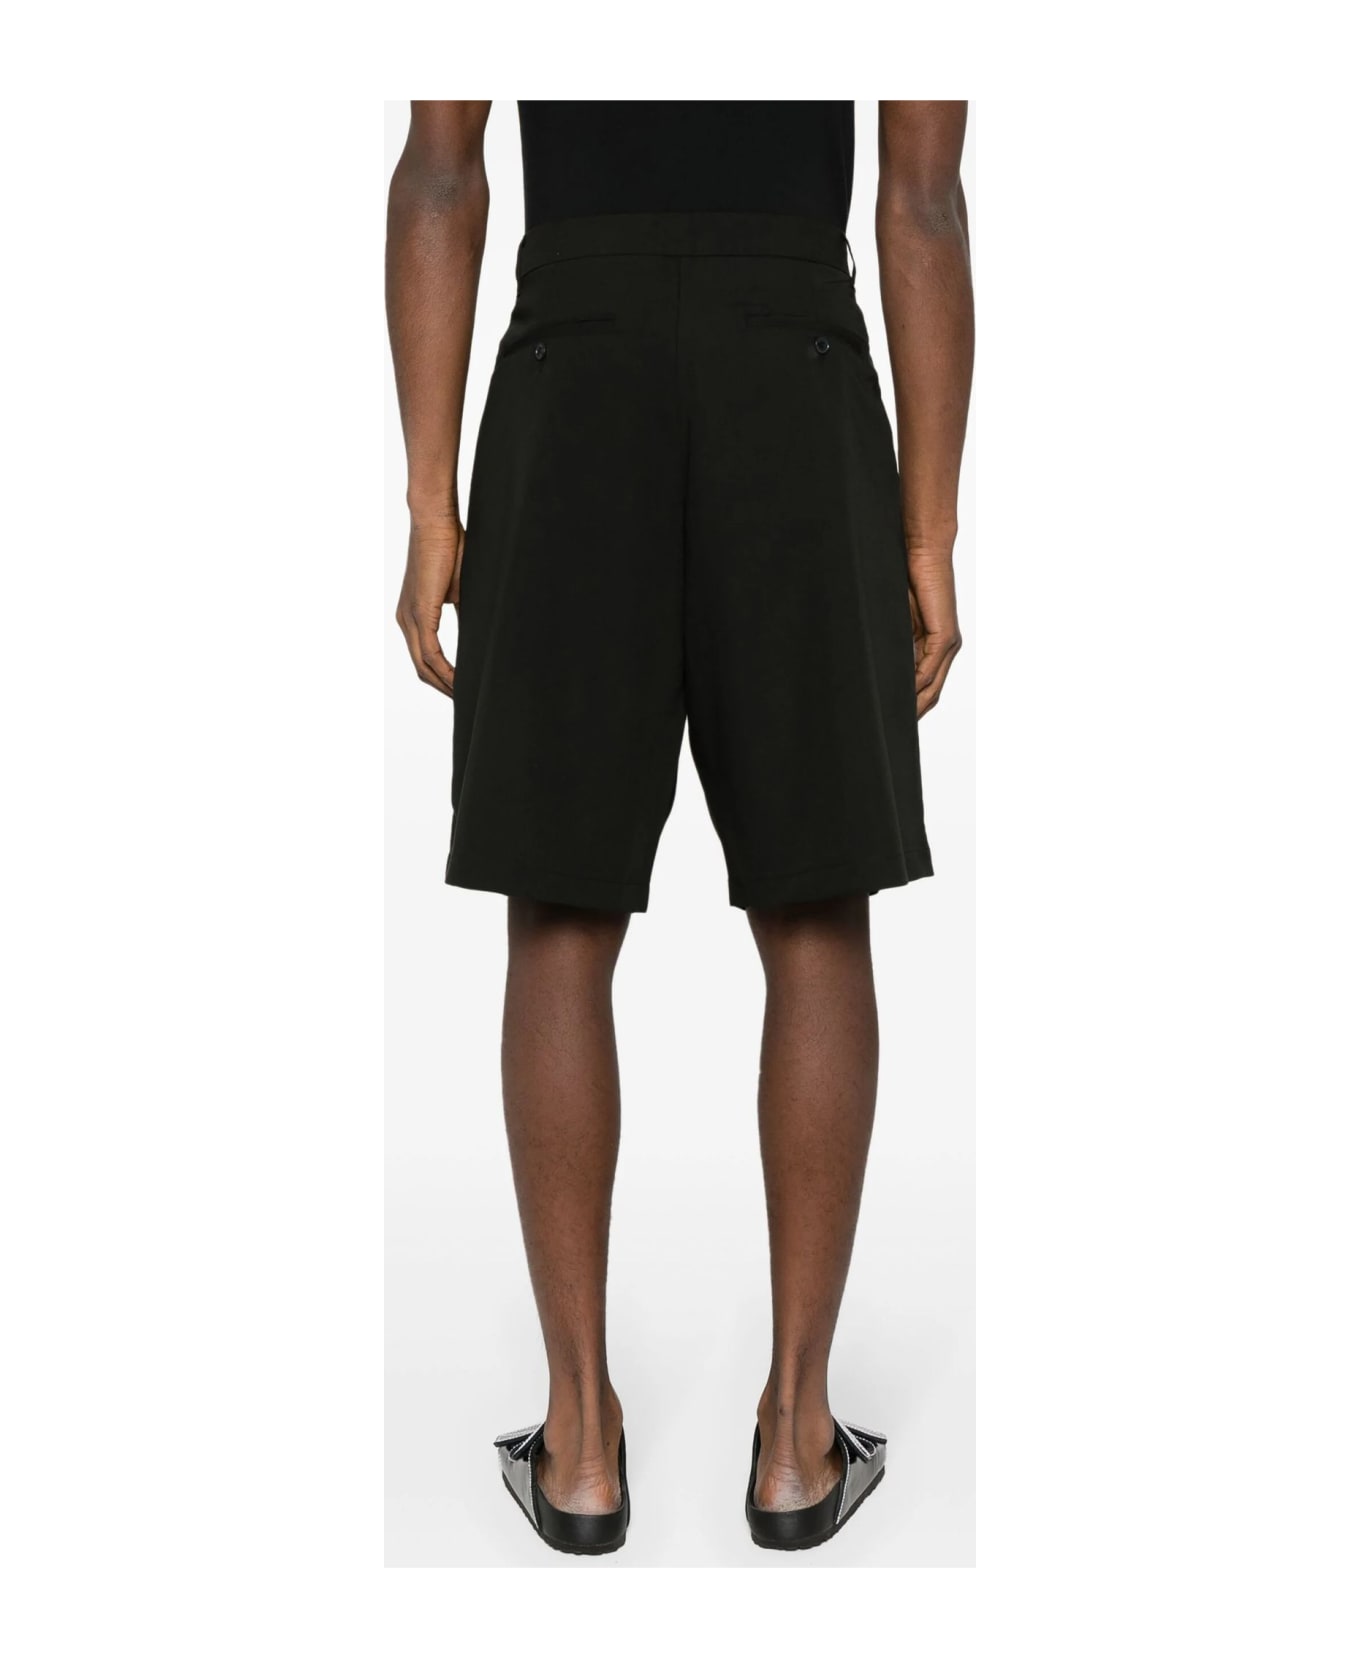 Family First Milano Family First Shorts Black - Black